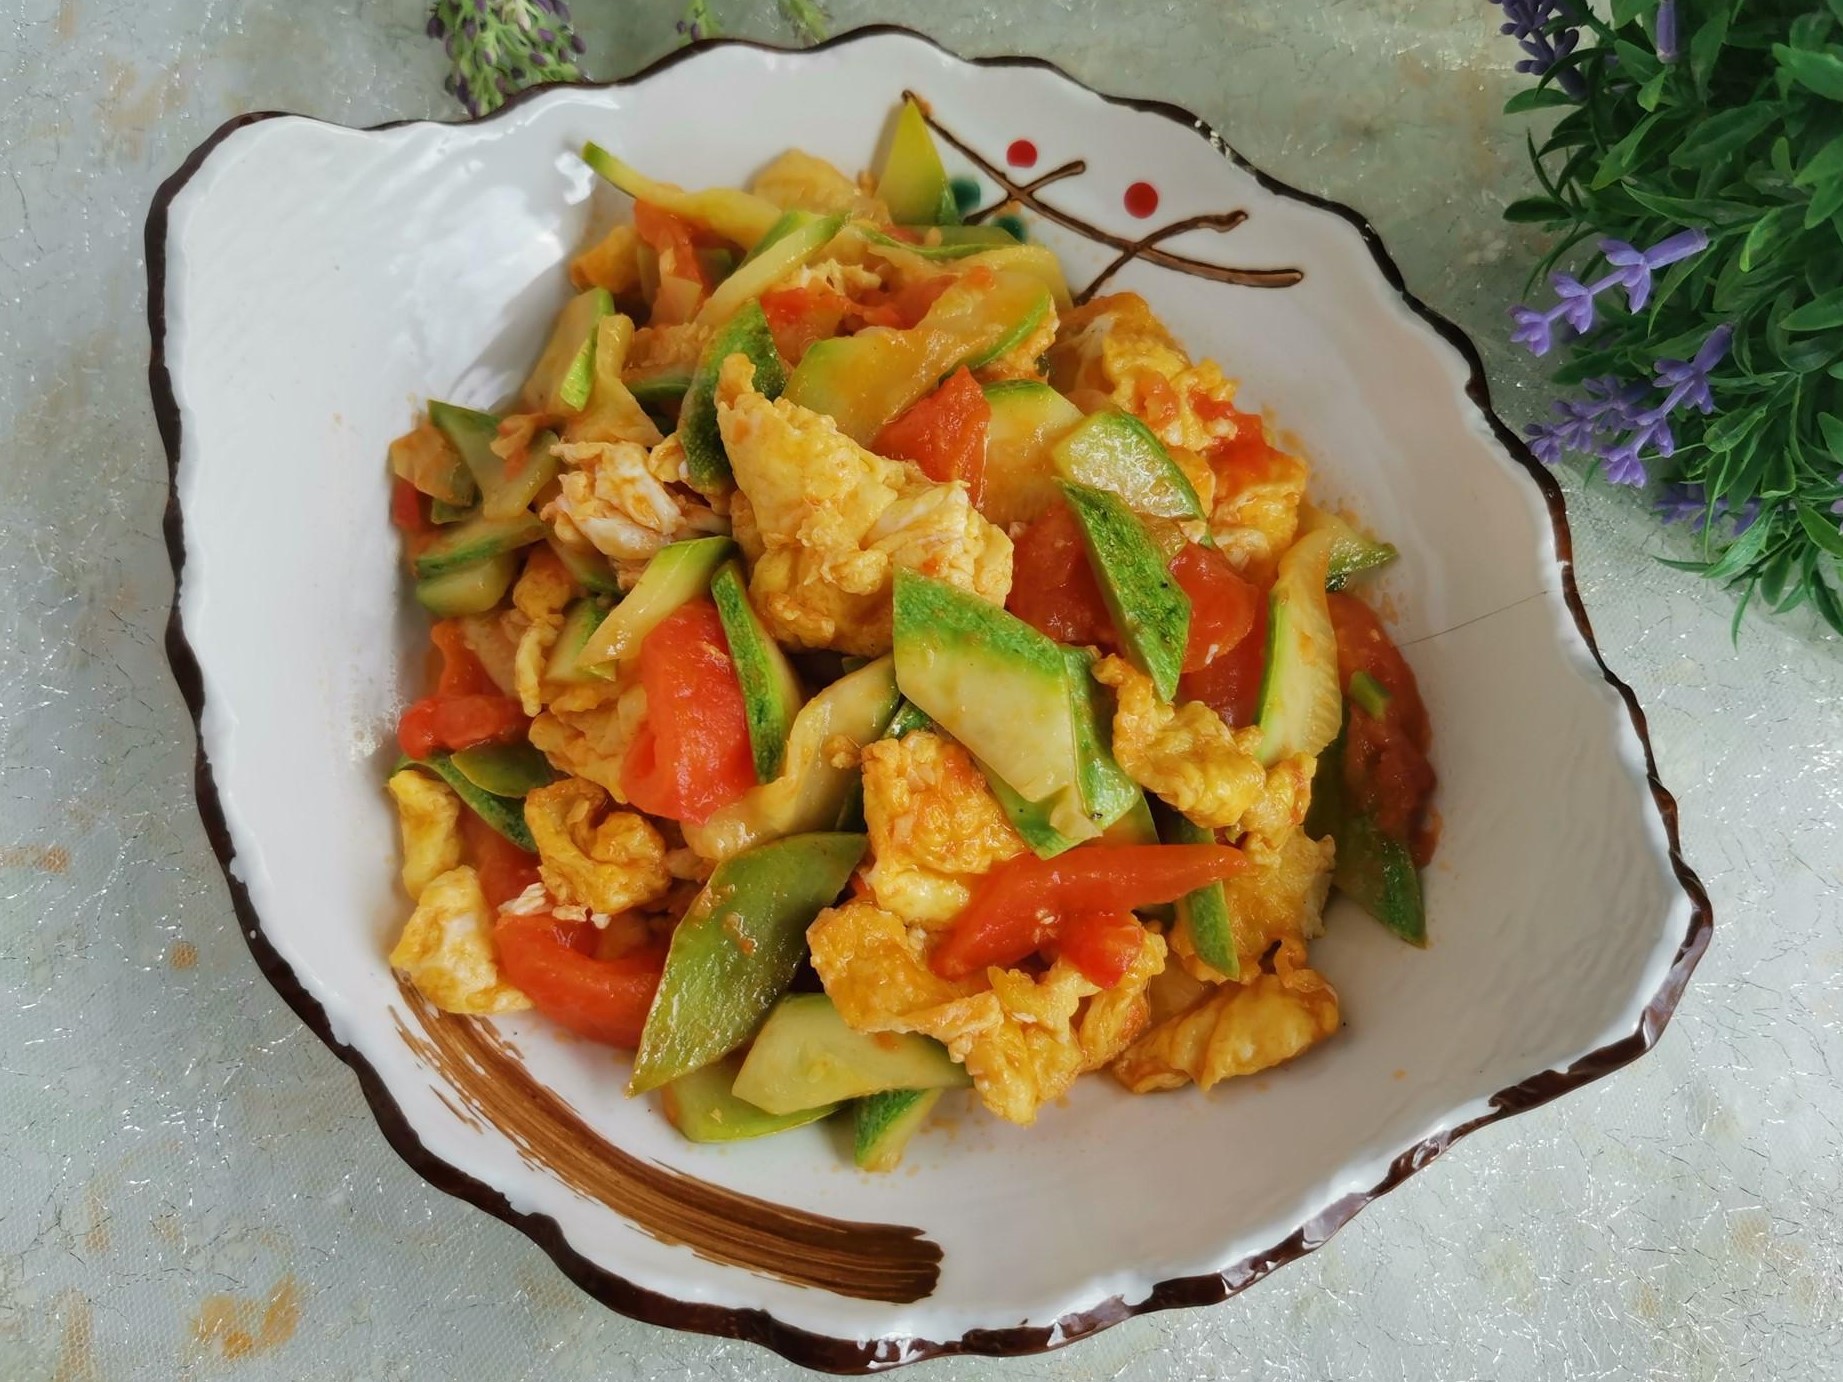 Zucchini and Tomato Stir-Fried With Egg Recipe